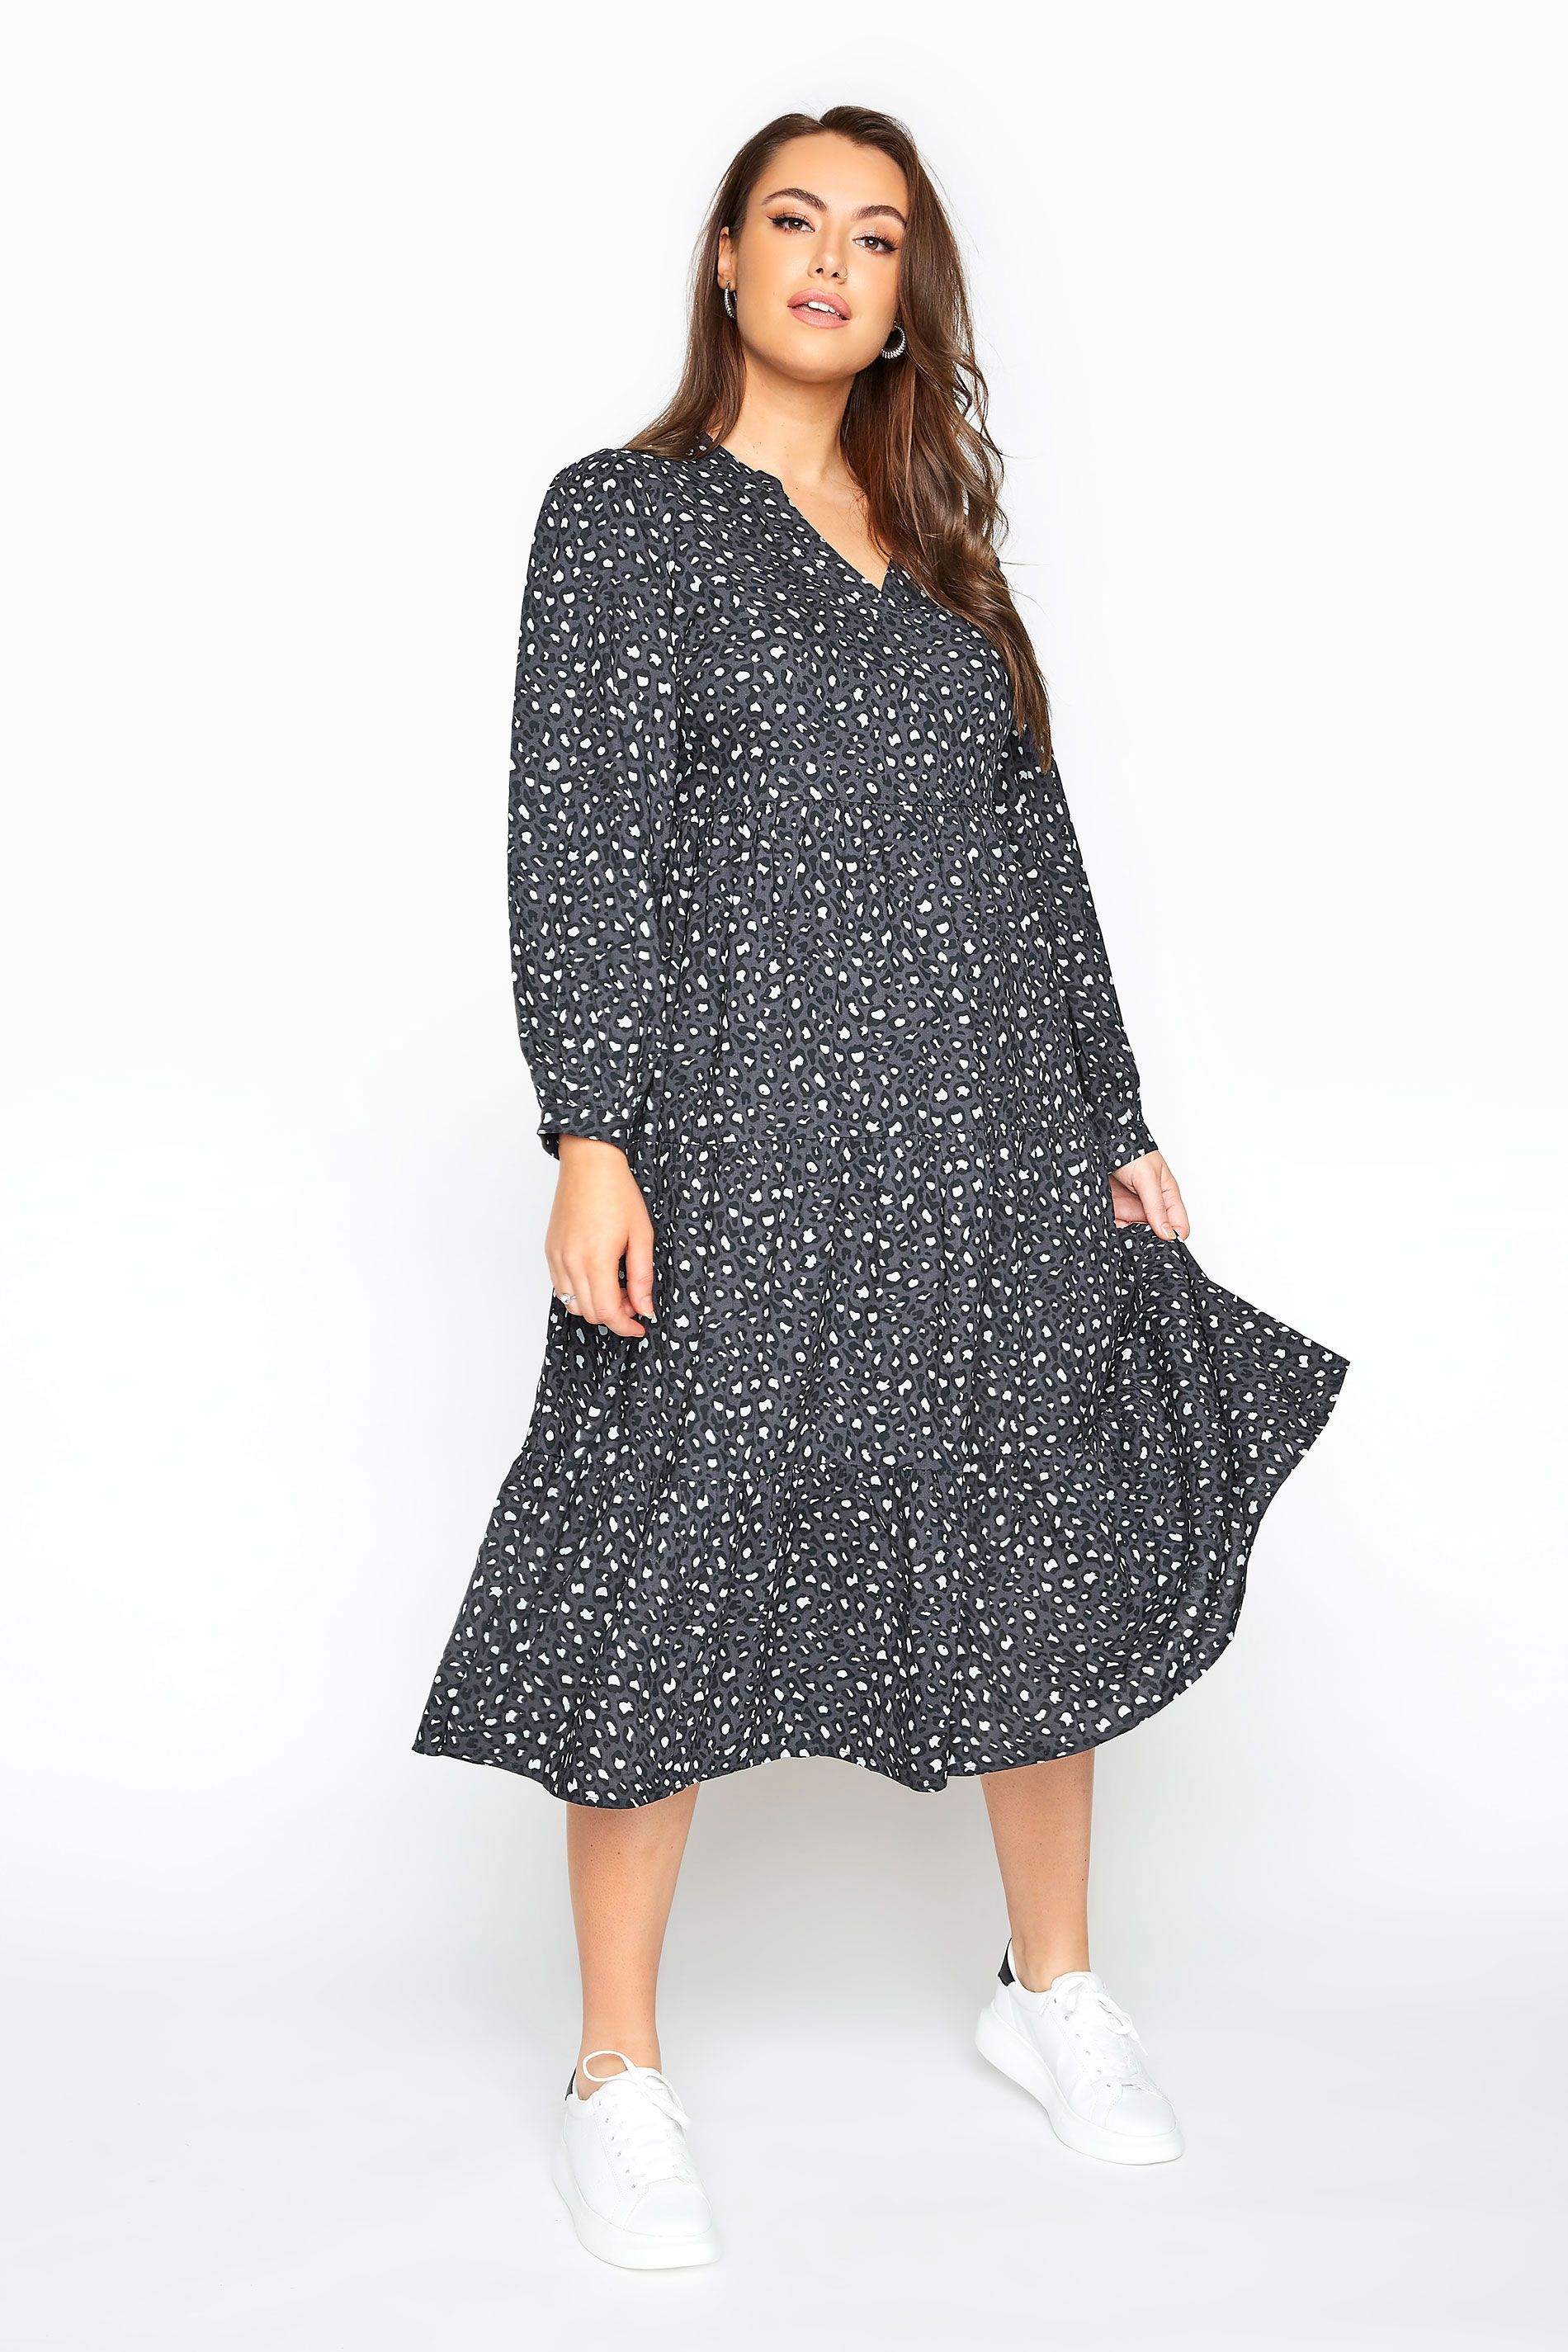 LIMITED COLLECTION Grey Leopard Print Tiered Smock Midi Dress | Yours ...